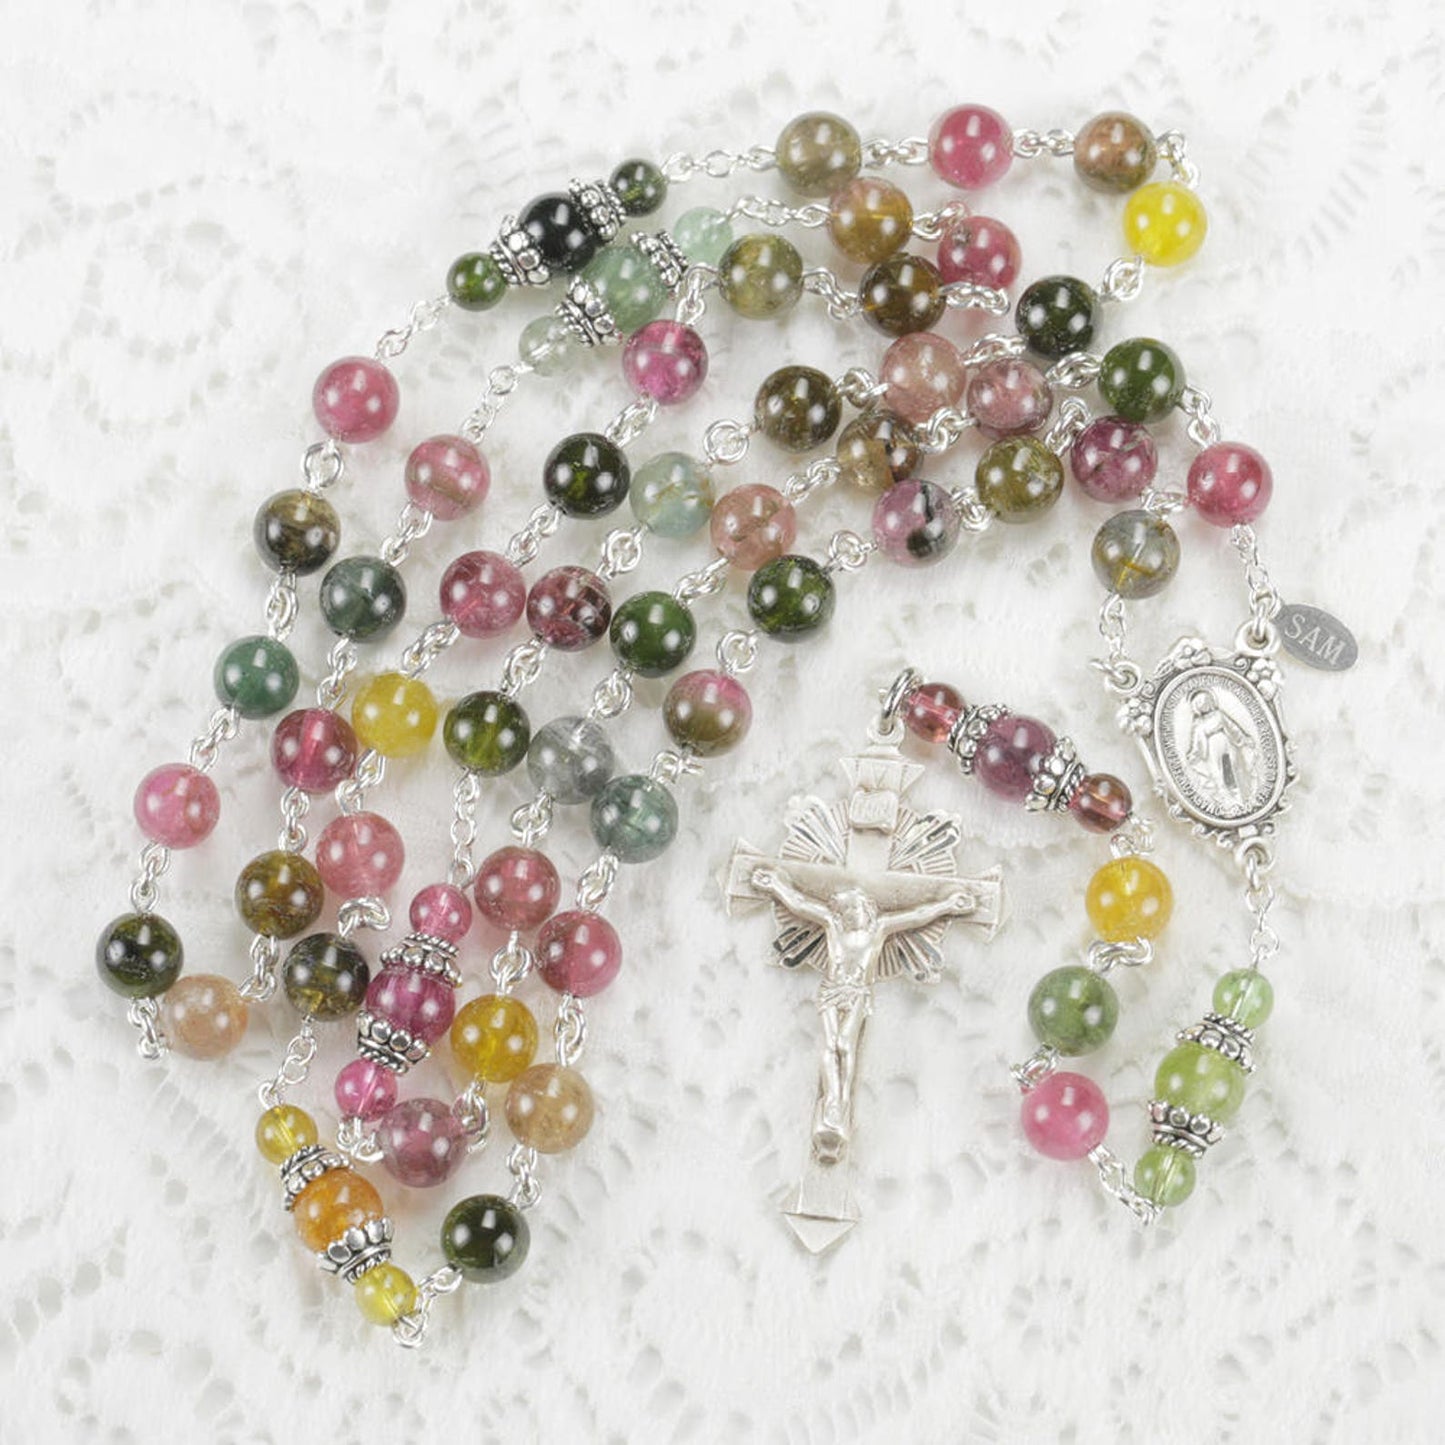 Catholic Women's Rosary Handmade with Tourmaline and Sterling Silver